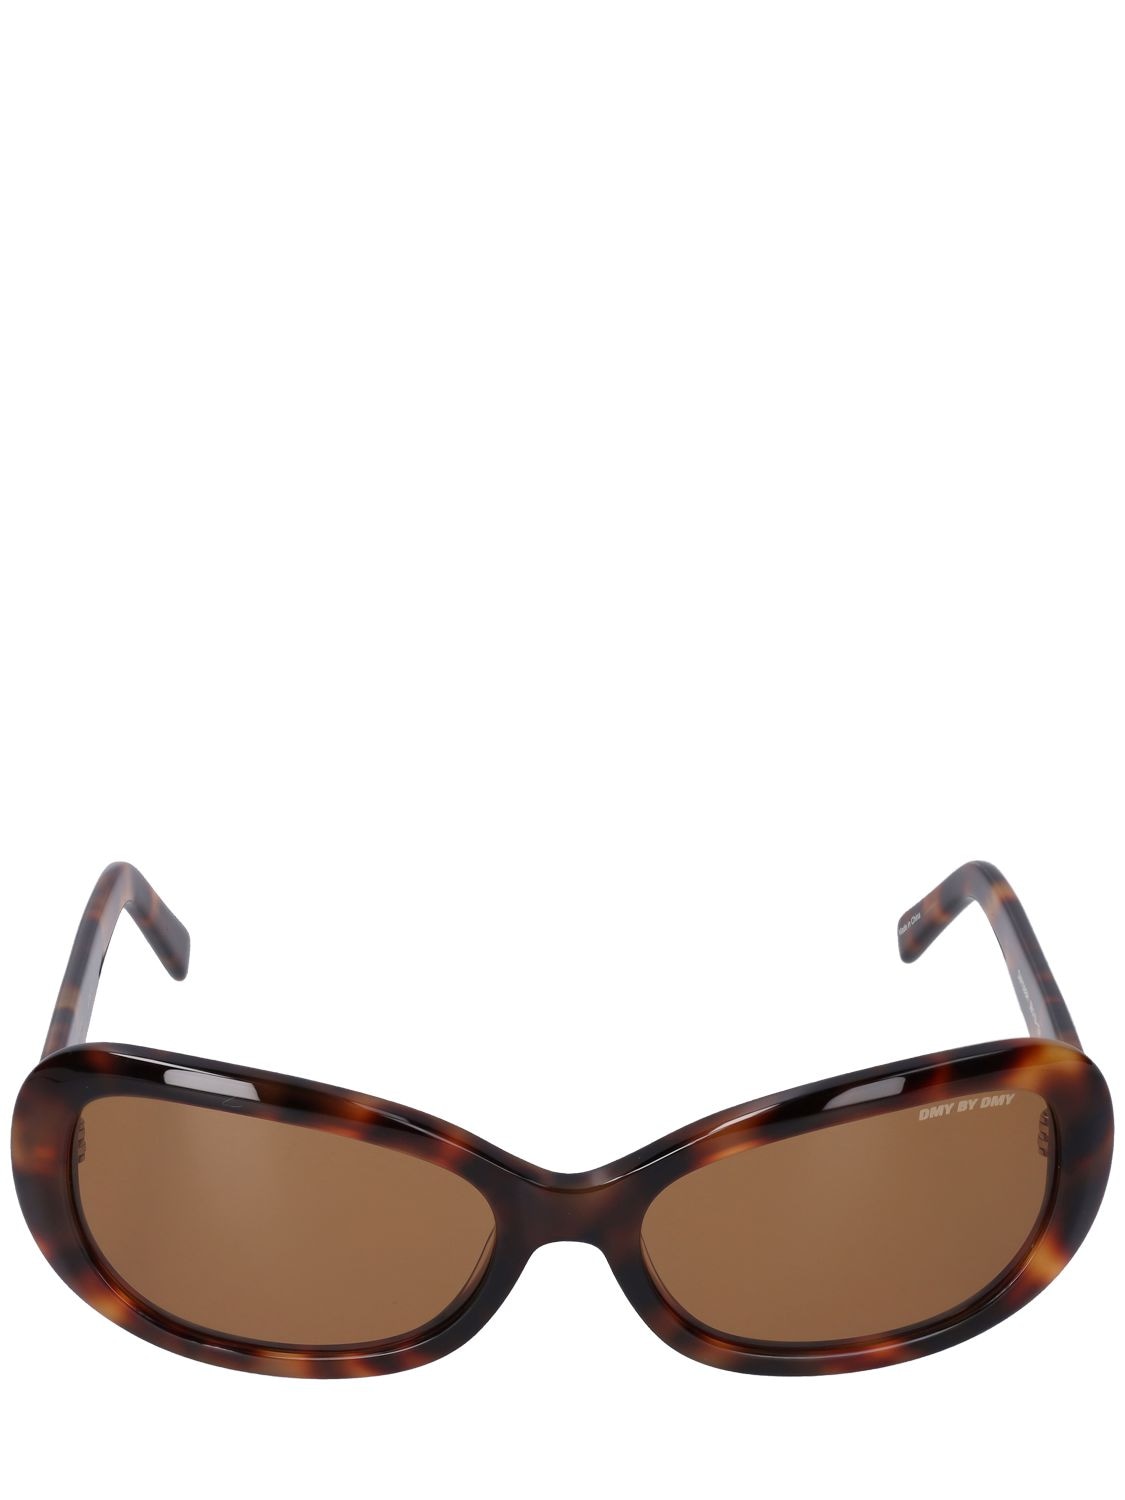 DMY BY DMY Andy Round Acetate Sunglasses